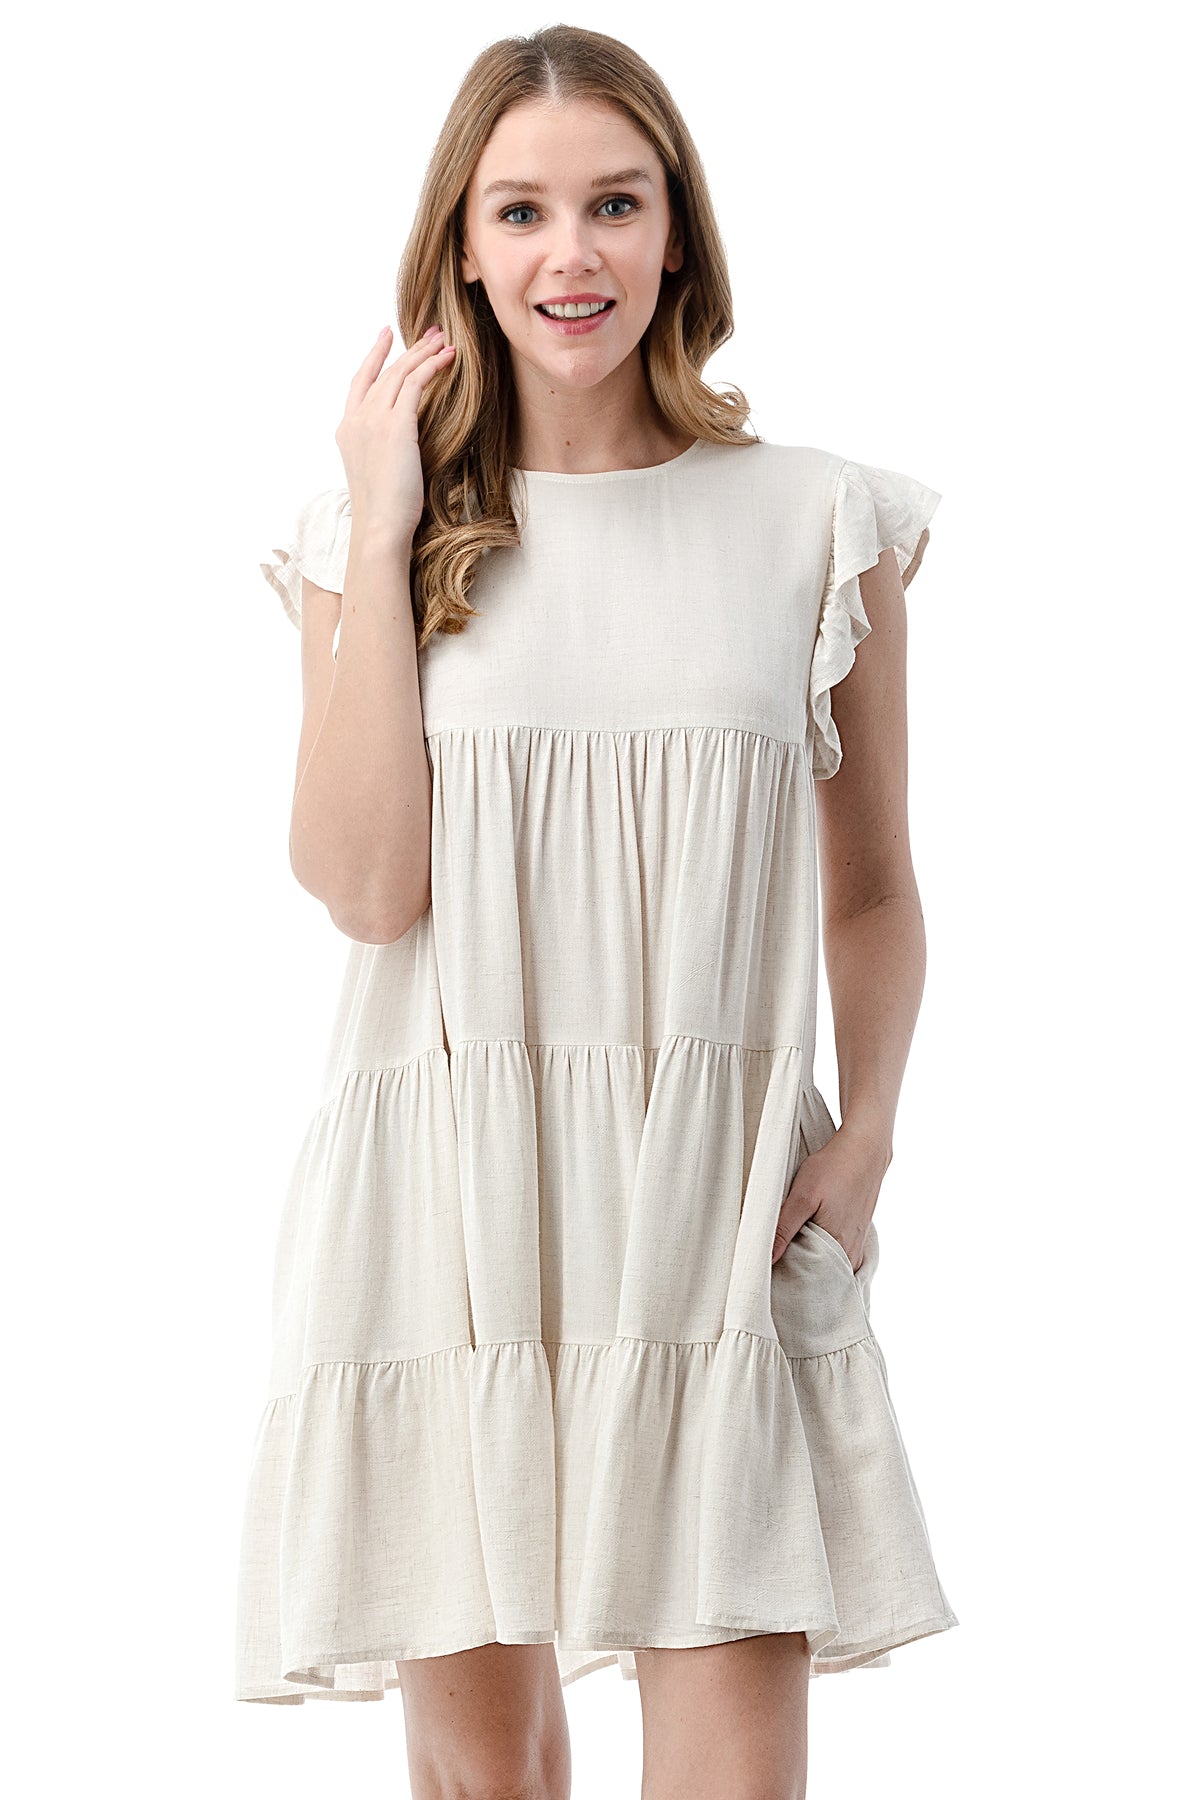 EDGY Land Girl's and Women's Butterfly Short Sleeve Round Neck Ruffled Above-Knee Dress with Shirring